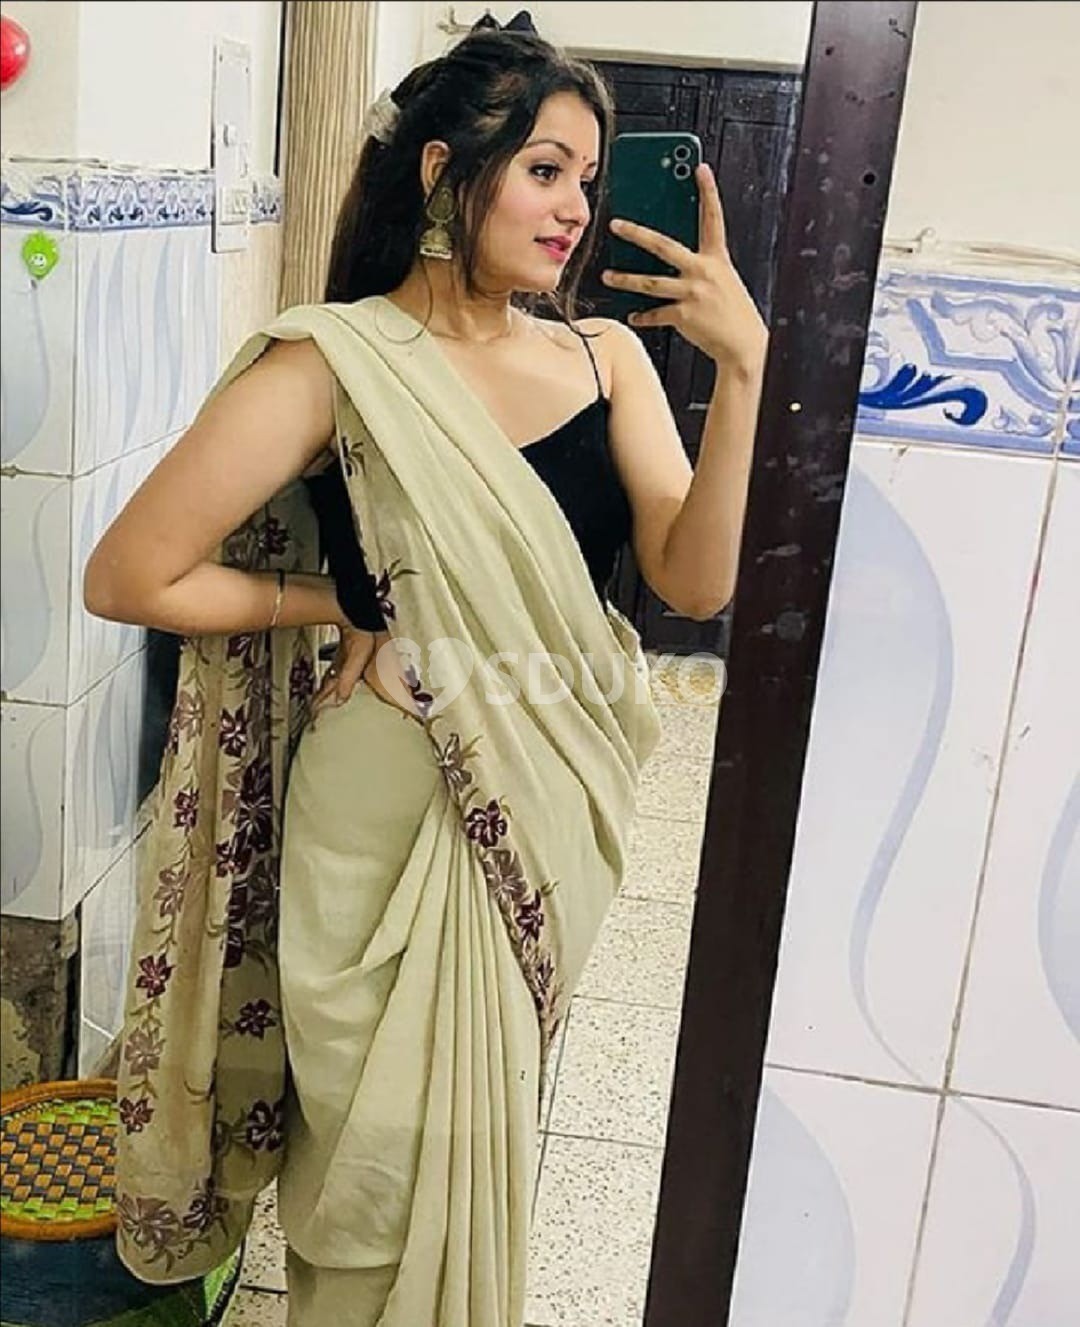 BEST PROFILE AVAILABLE IN VIJAYNAGAR 100% SAFE AND SECURE TODAY LOW PRICE UNLIMITED ENJOY HOT COLLEGE GIRL HOUSEWIFE AUN